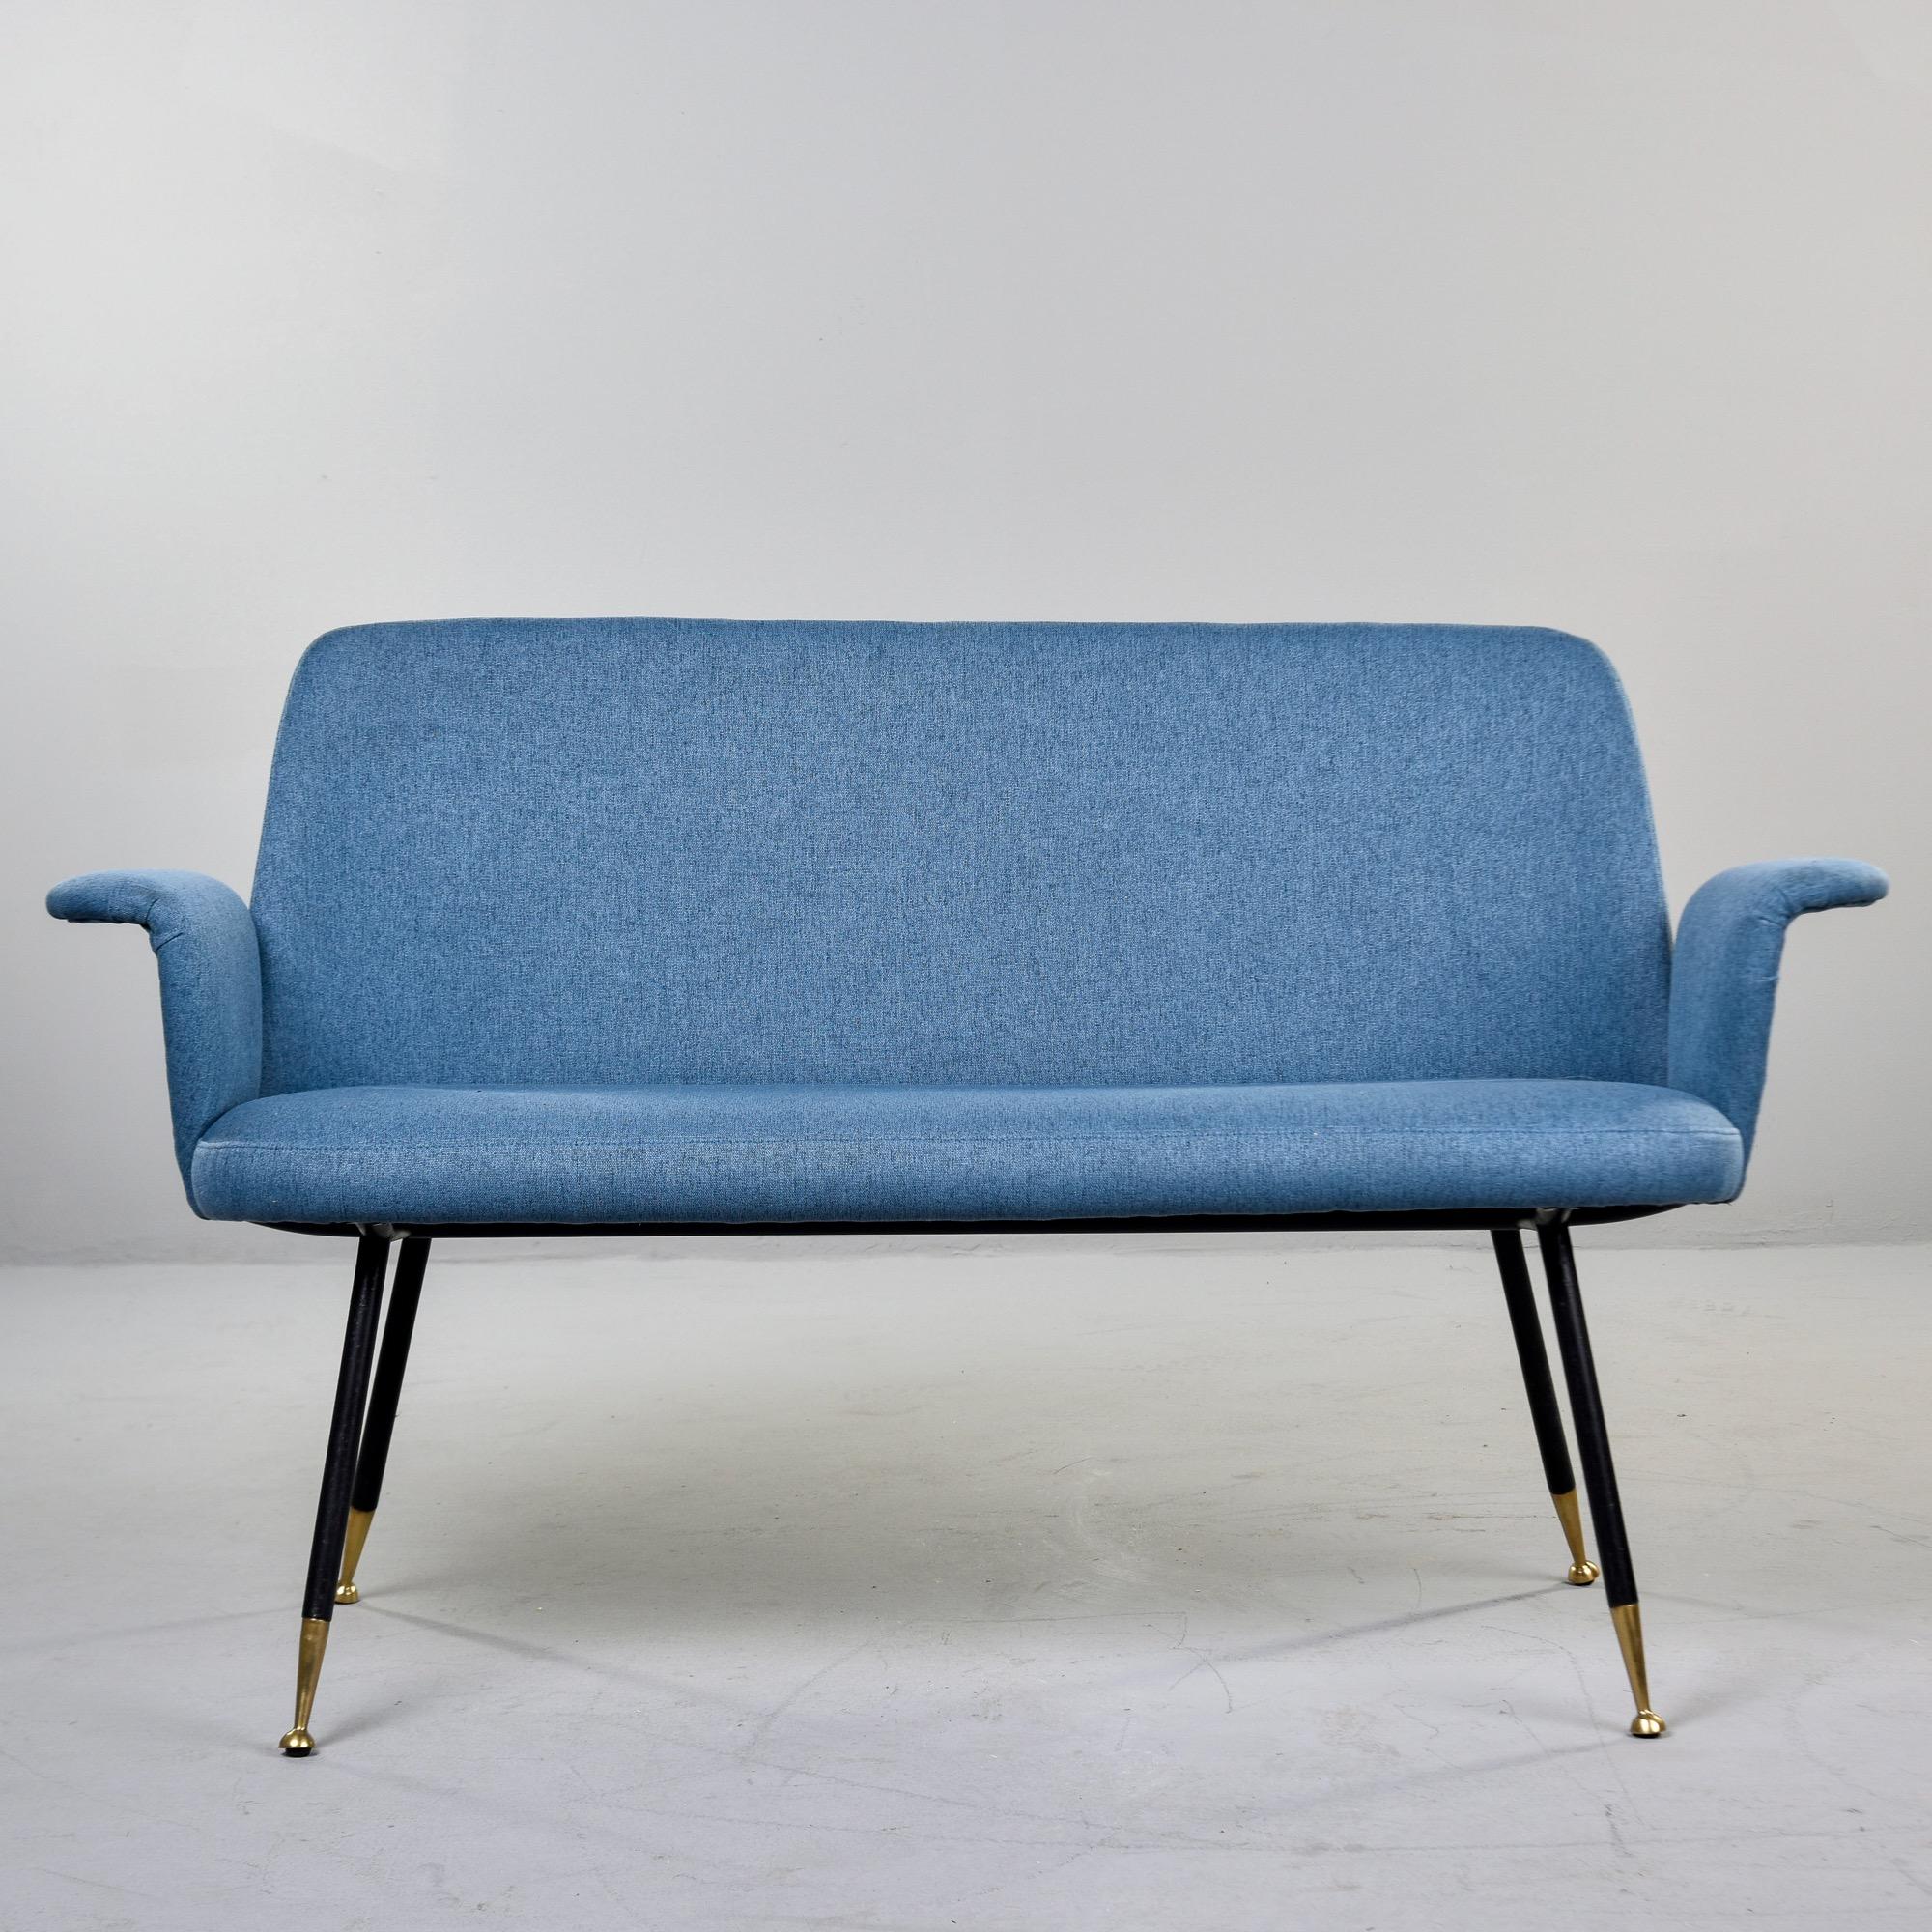 Found in Italy, this small upholstered settee dates from the 1950s. The sofa features simple lines with curved armrests and slender, tapered black iron legs and brass-tipped feet. Reupholstered in medium blue fabric by the Italian dealer we acquired